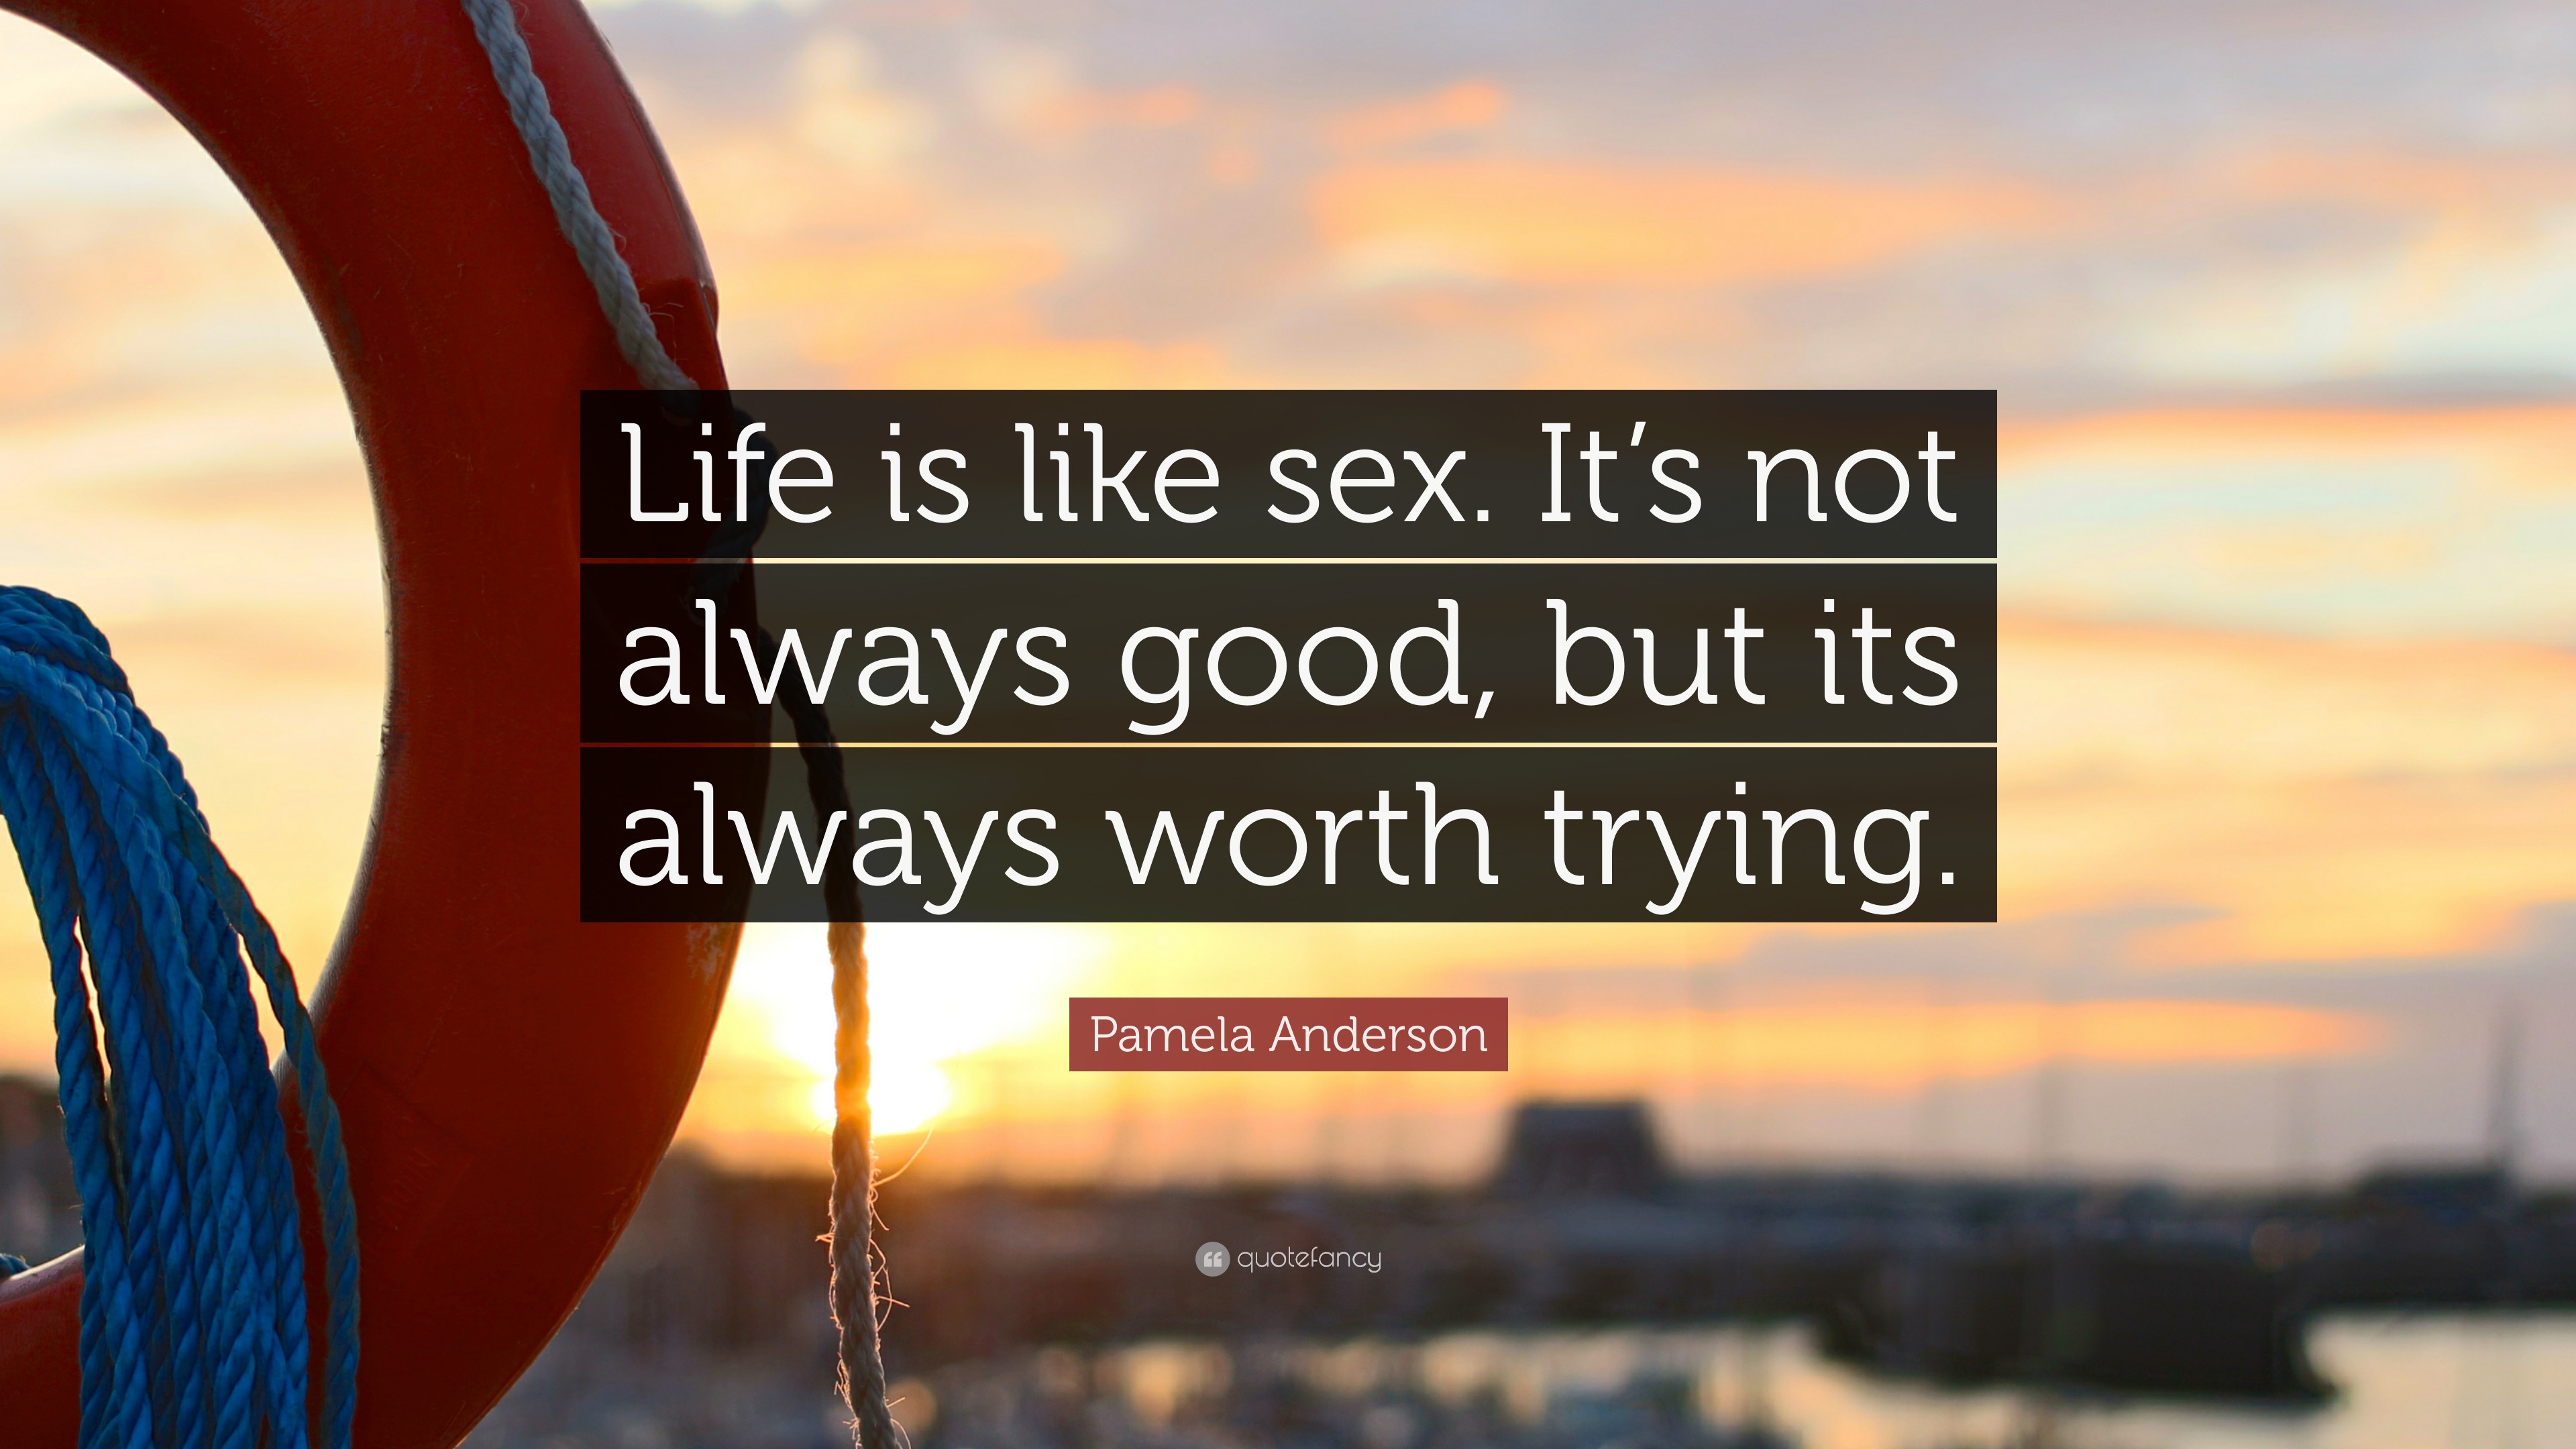 Pamela Anderson Quote “life Is Like Sex Its Not Always Good But Its Always Worth Trying” 